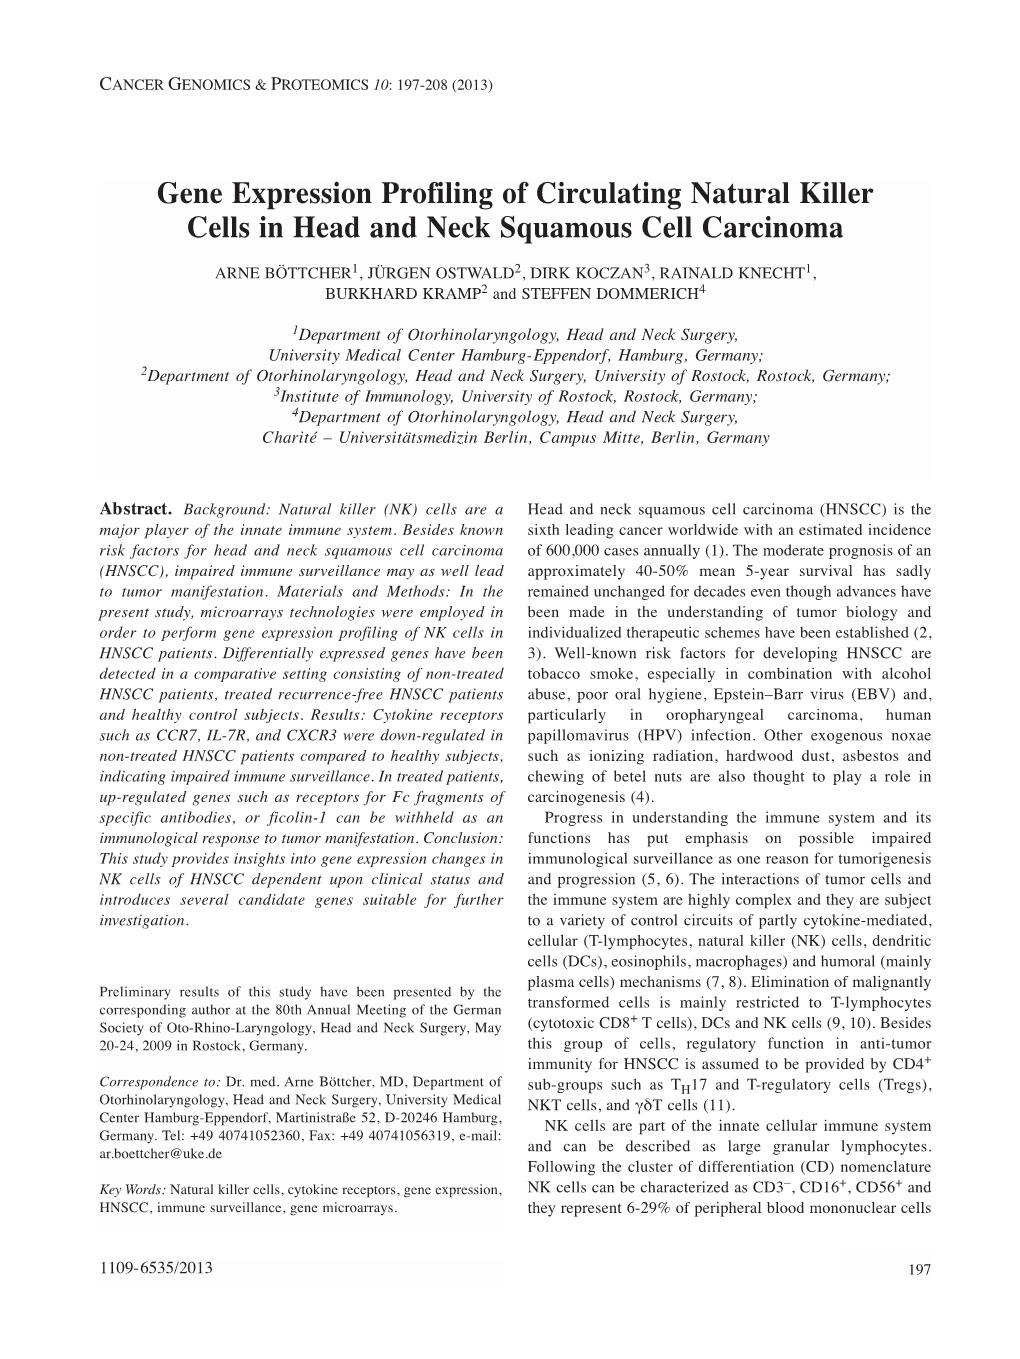 Gene Expression Profiling of Circulating Natural Killer Cells in Head and Neck Squamous Cell Carcinoma